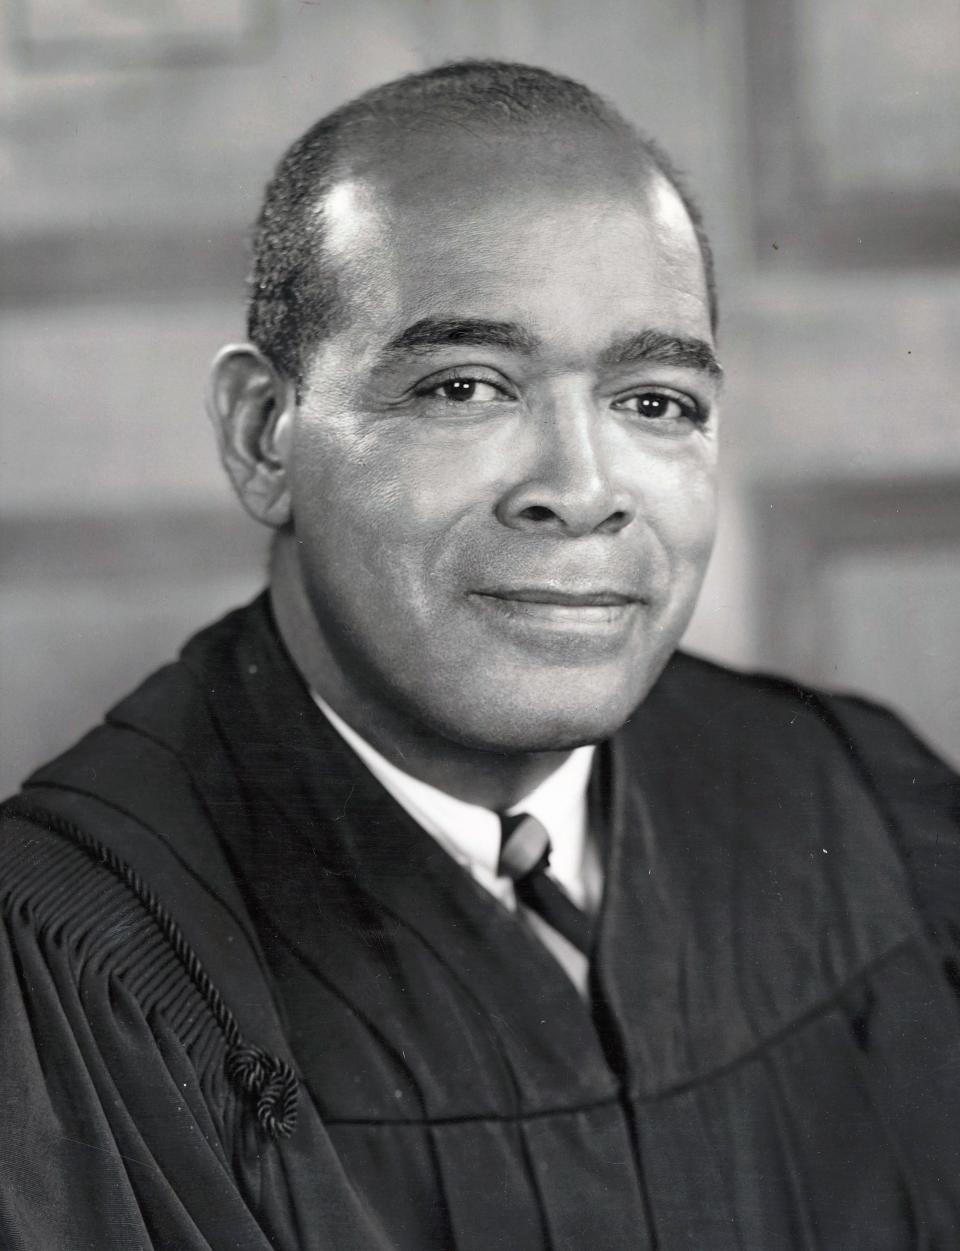 Ohio Gov. Michael DiSalle appointed William H. Brooks to be a municipal court judge in 1963, the first Black person to serve in that role.